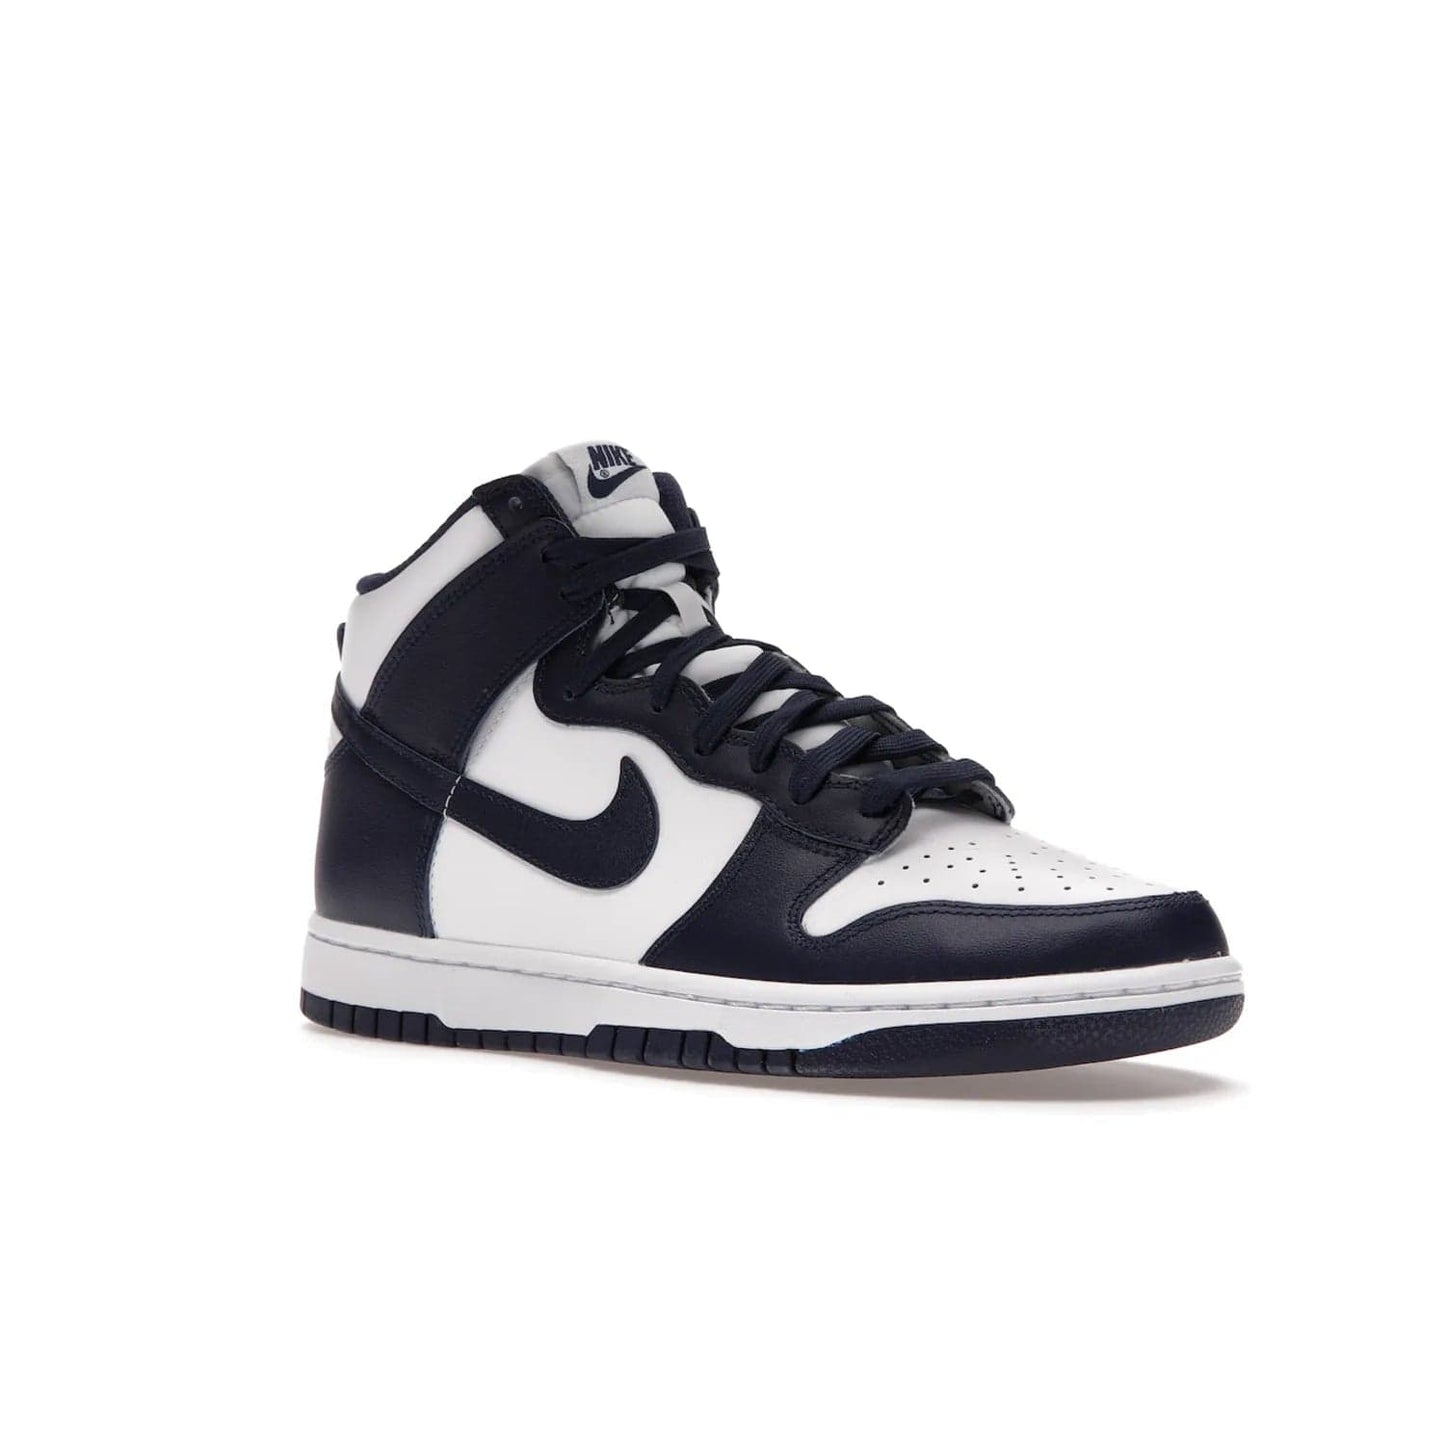 Nike Dunk High Championship Navy - Image 5 - Only at www.BallersClubKickz.com - Classic athletic style meets striking color-blocking on the Nike Dunk High Championship Navy. A white leather upper with Championship Navy overlays creates a retro look with a woven tongue label and sole. Unleash your inner champion with the Nike Dunk High Championship Navy.